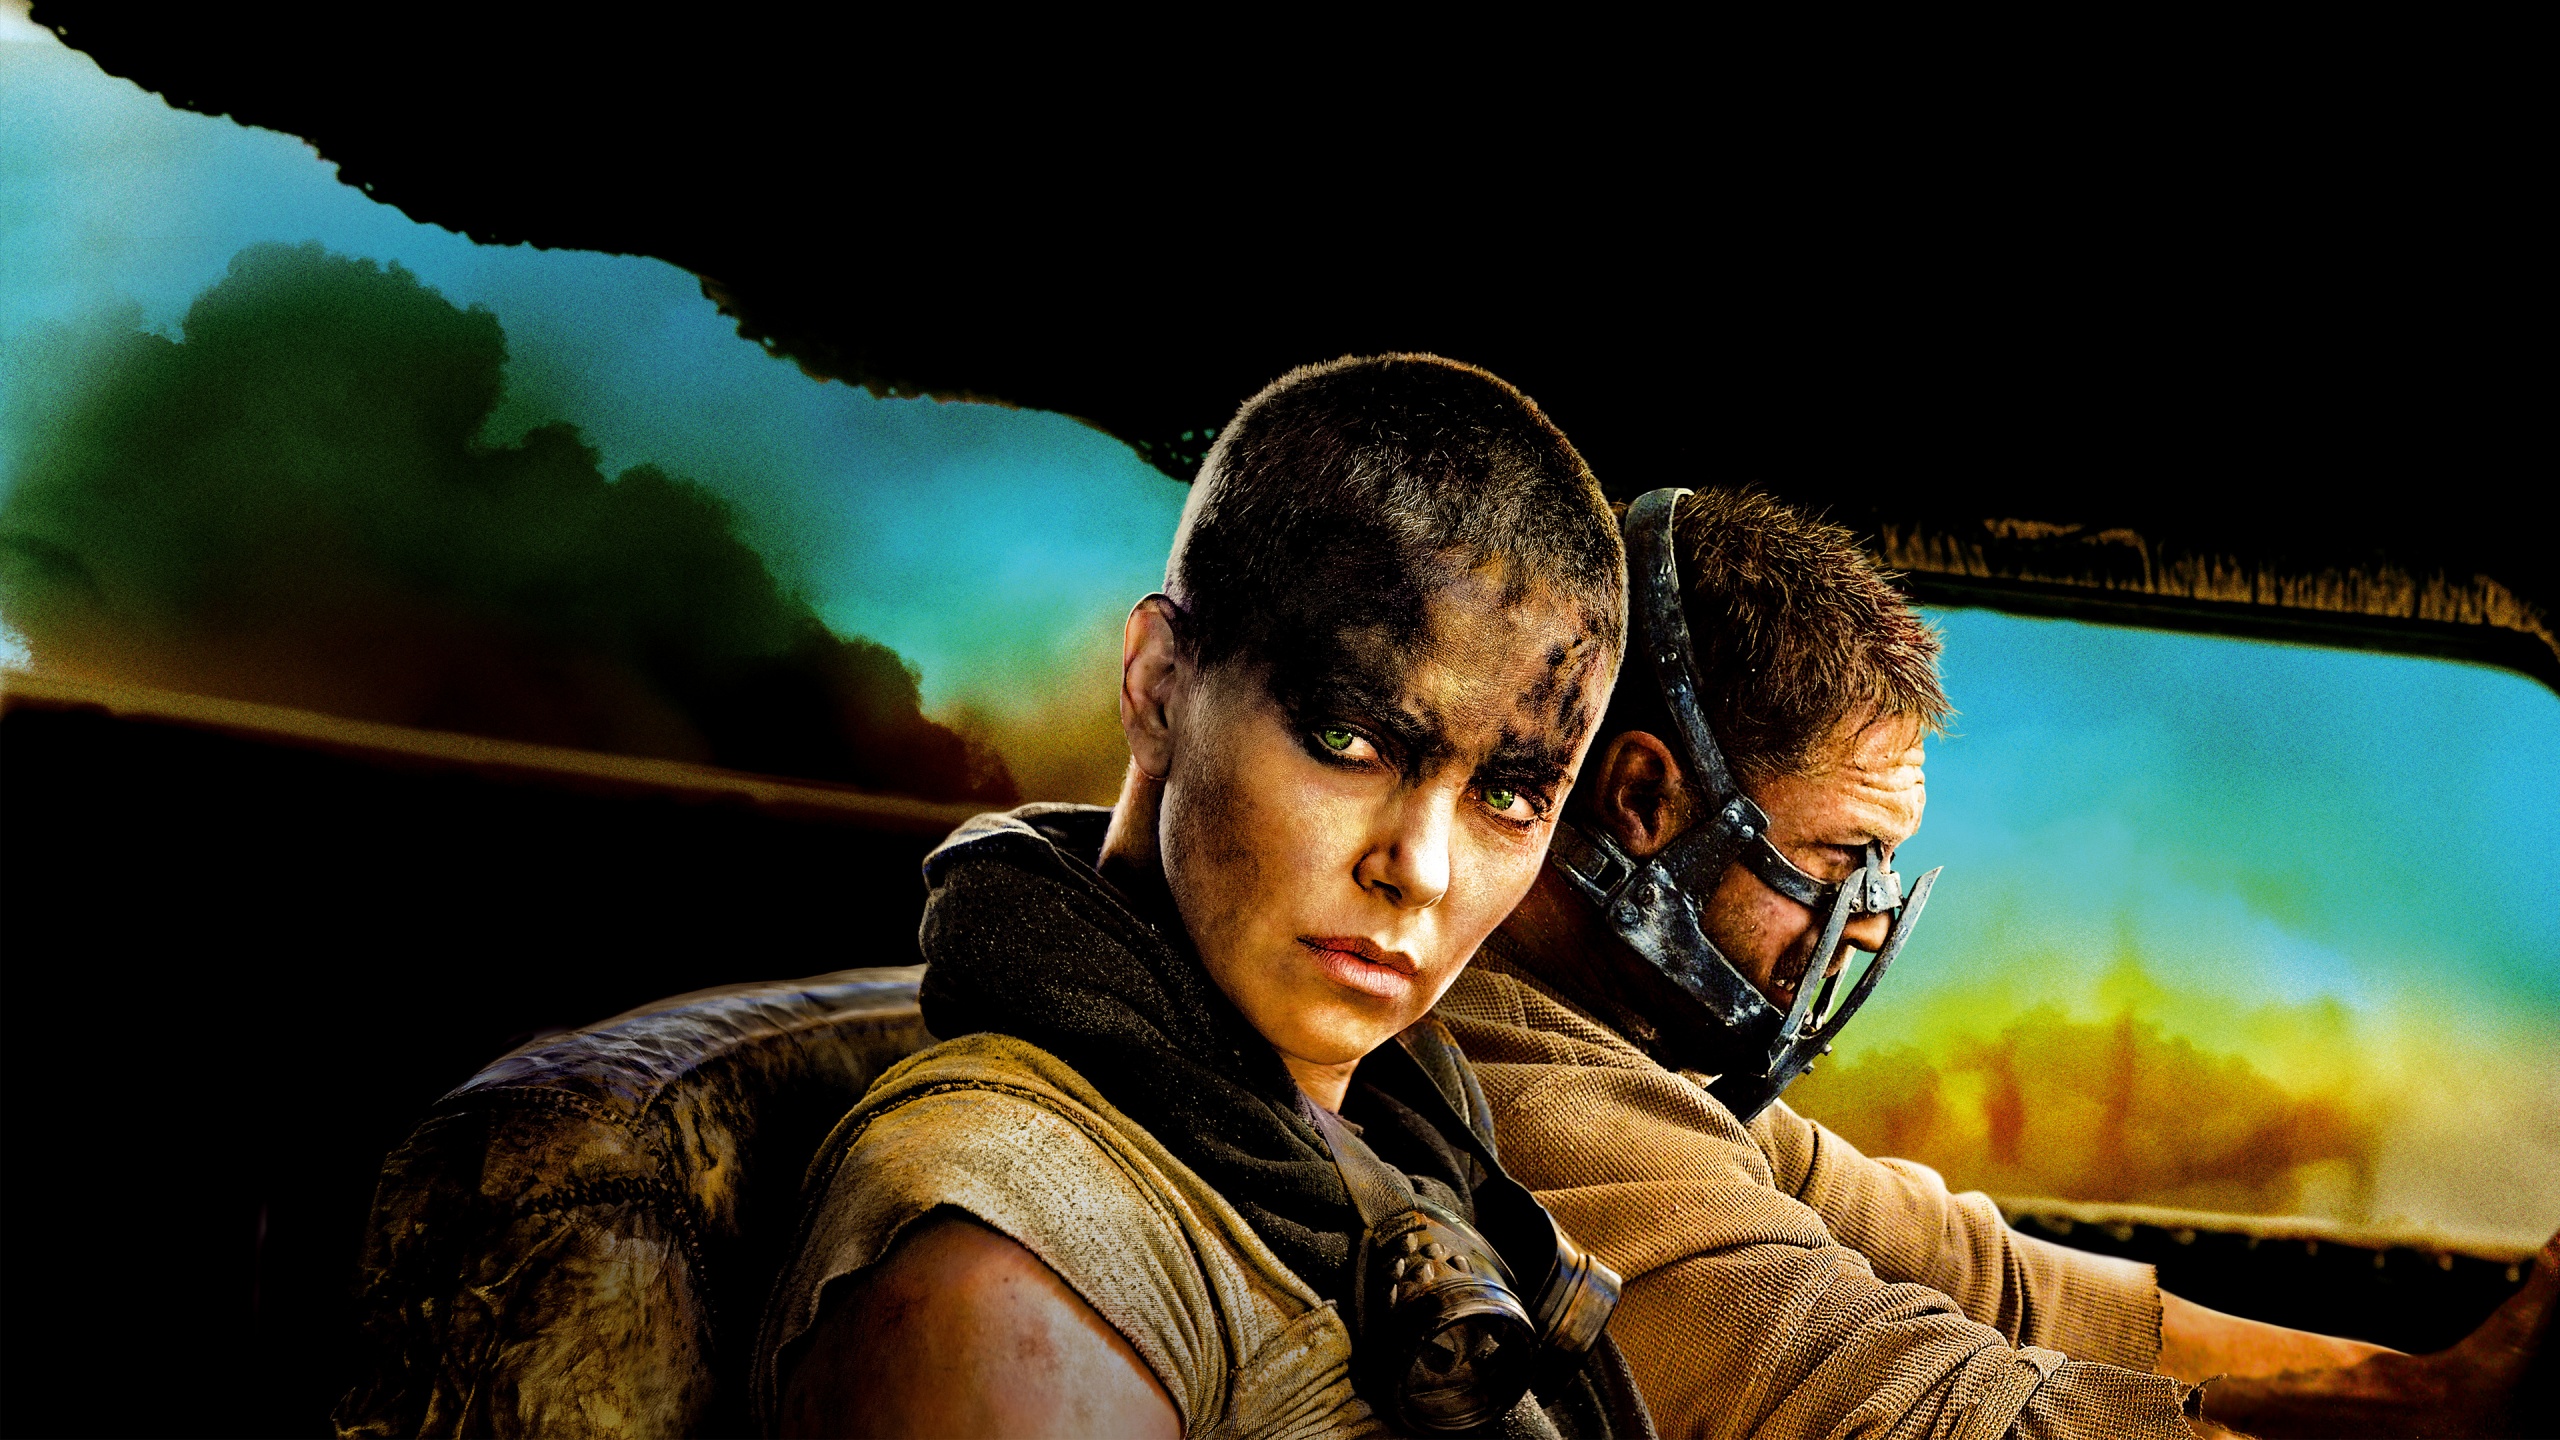 Charlize Theron Mad Max Fury Road Wallpapers In Jpg Format For Free Download